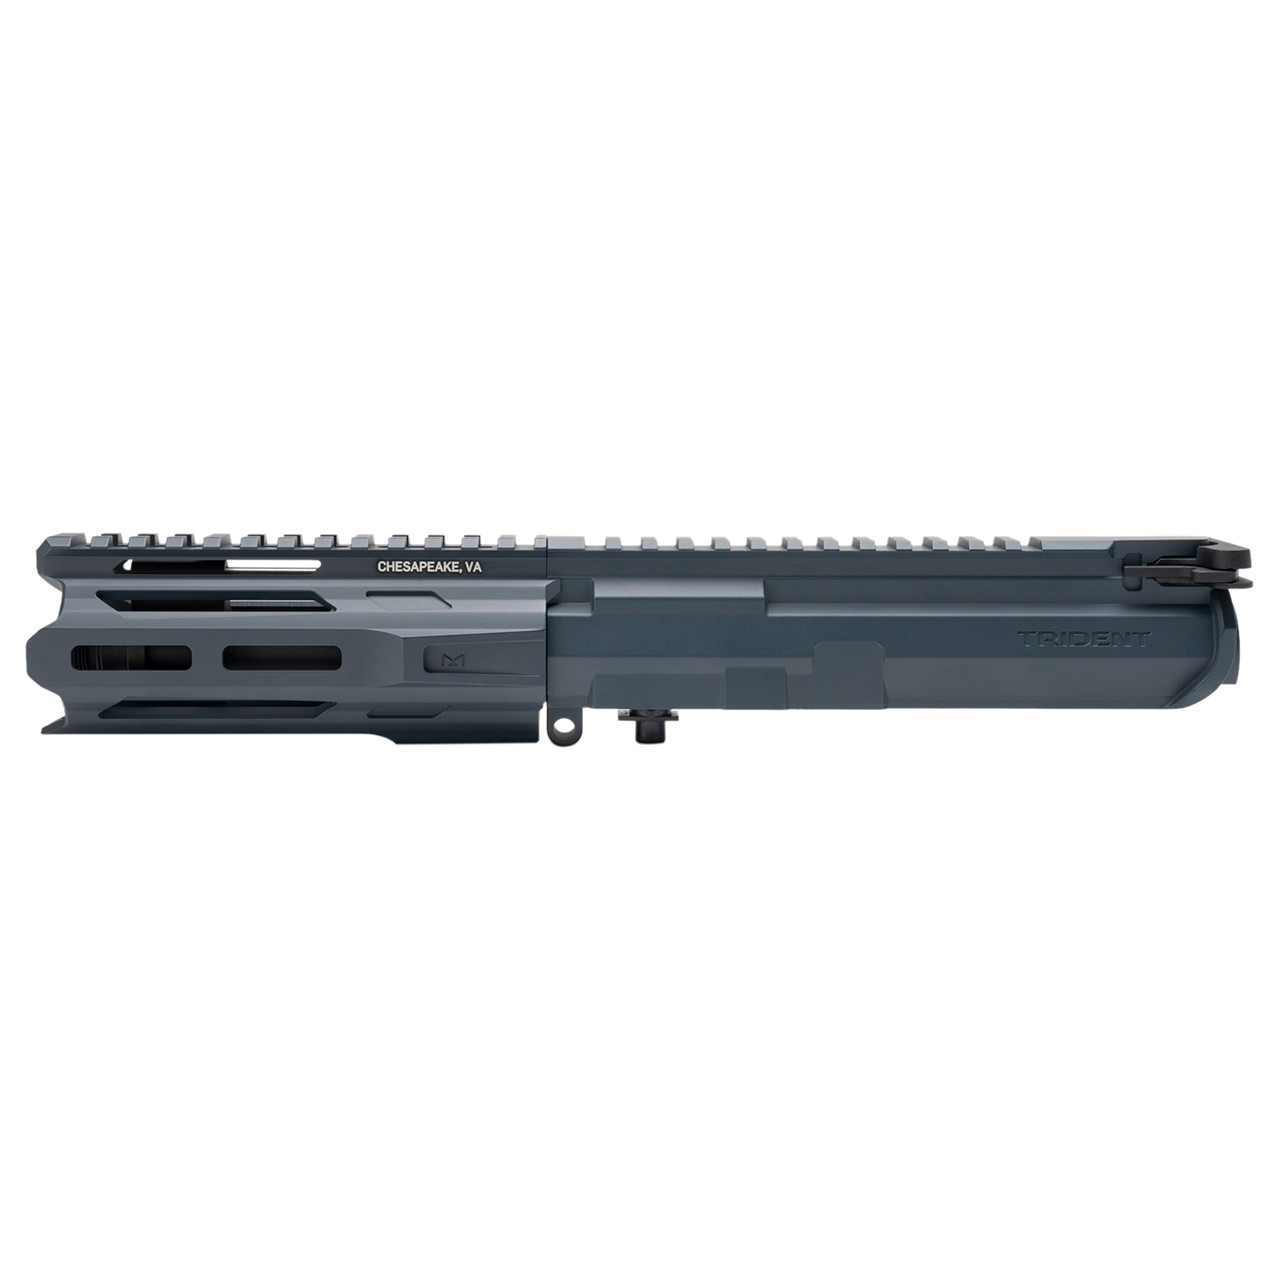 Shop Trident MK2 PDW-M Complete Upper Assembly / CG - $ 235 - Krytac.com | For Airsoft Use Only.